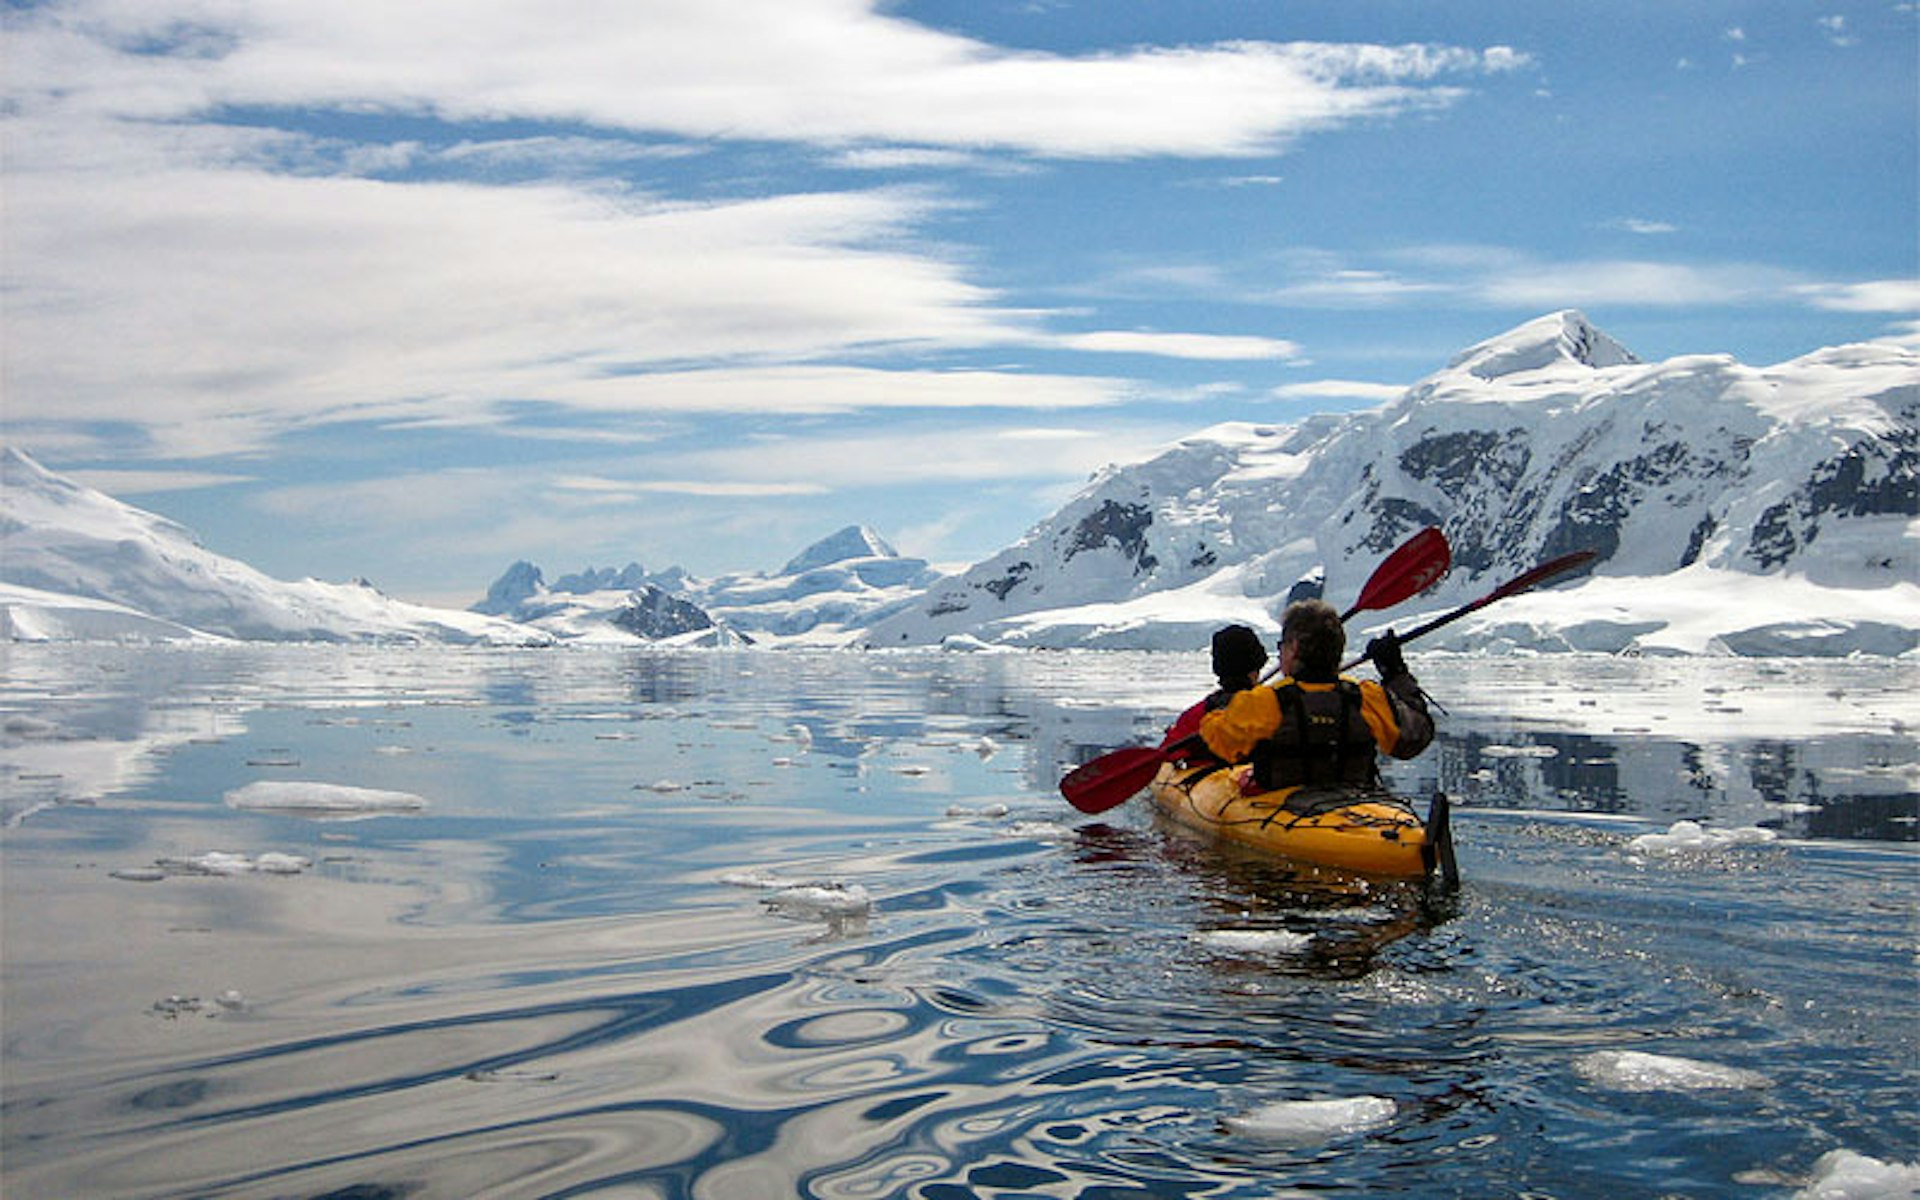 Two people in a kayak move through icy water, surrounded by snowy hills and ridges